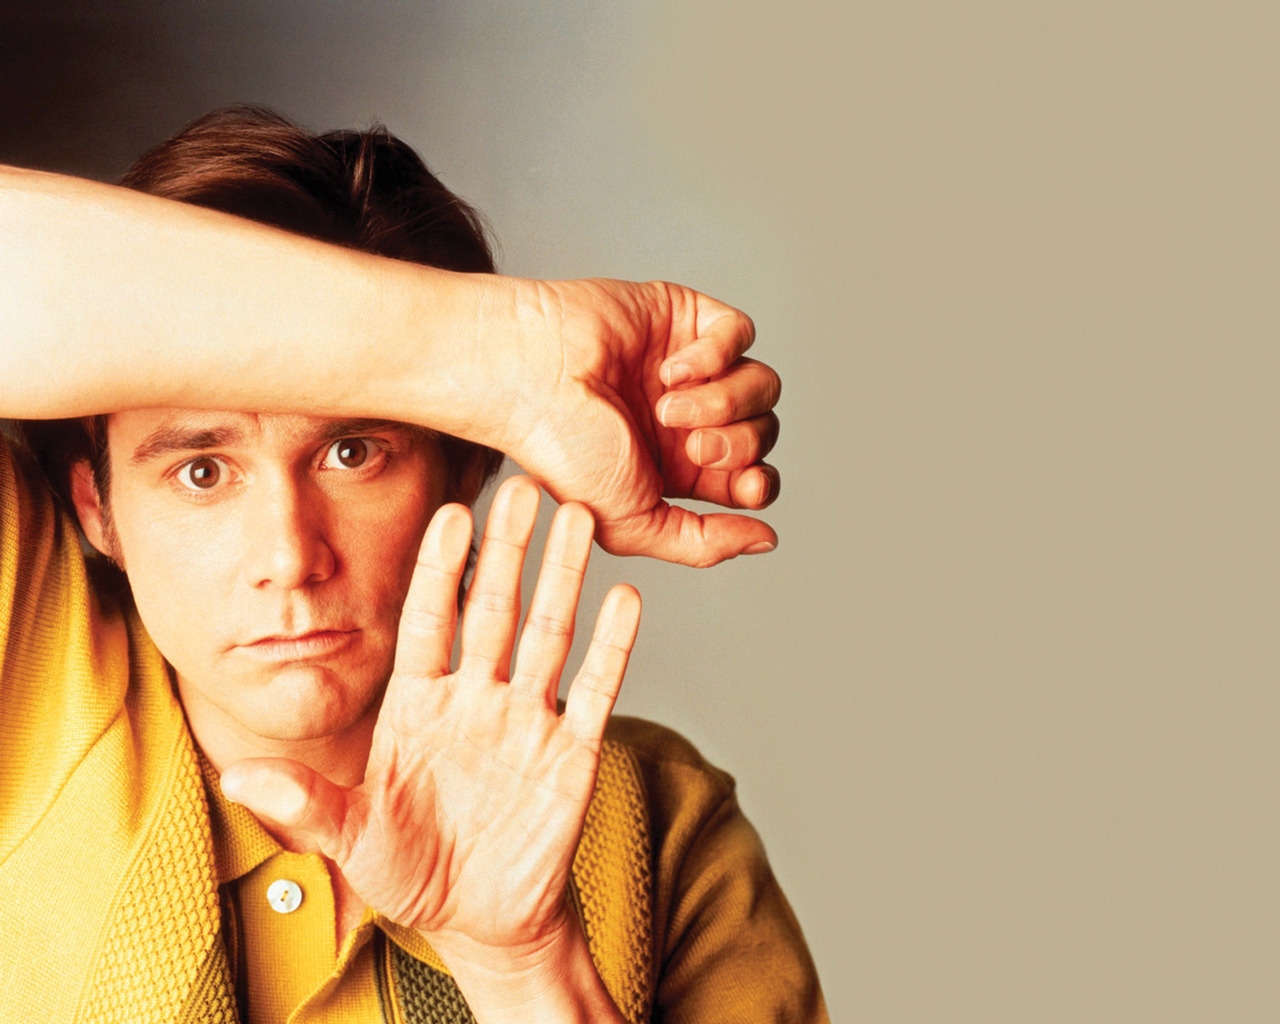 Jim Carrey for 1280 x 1024 resolution